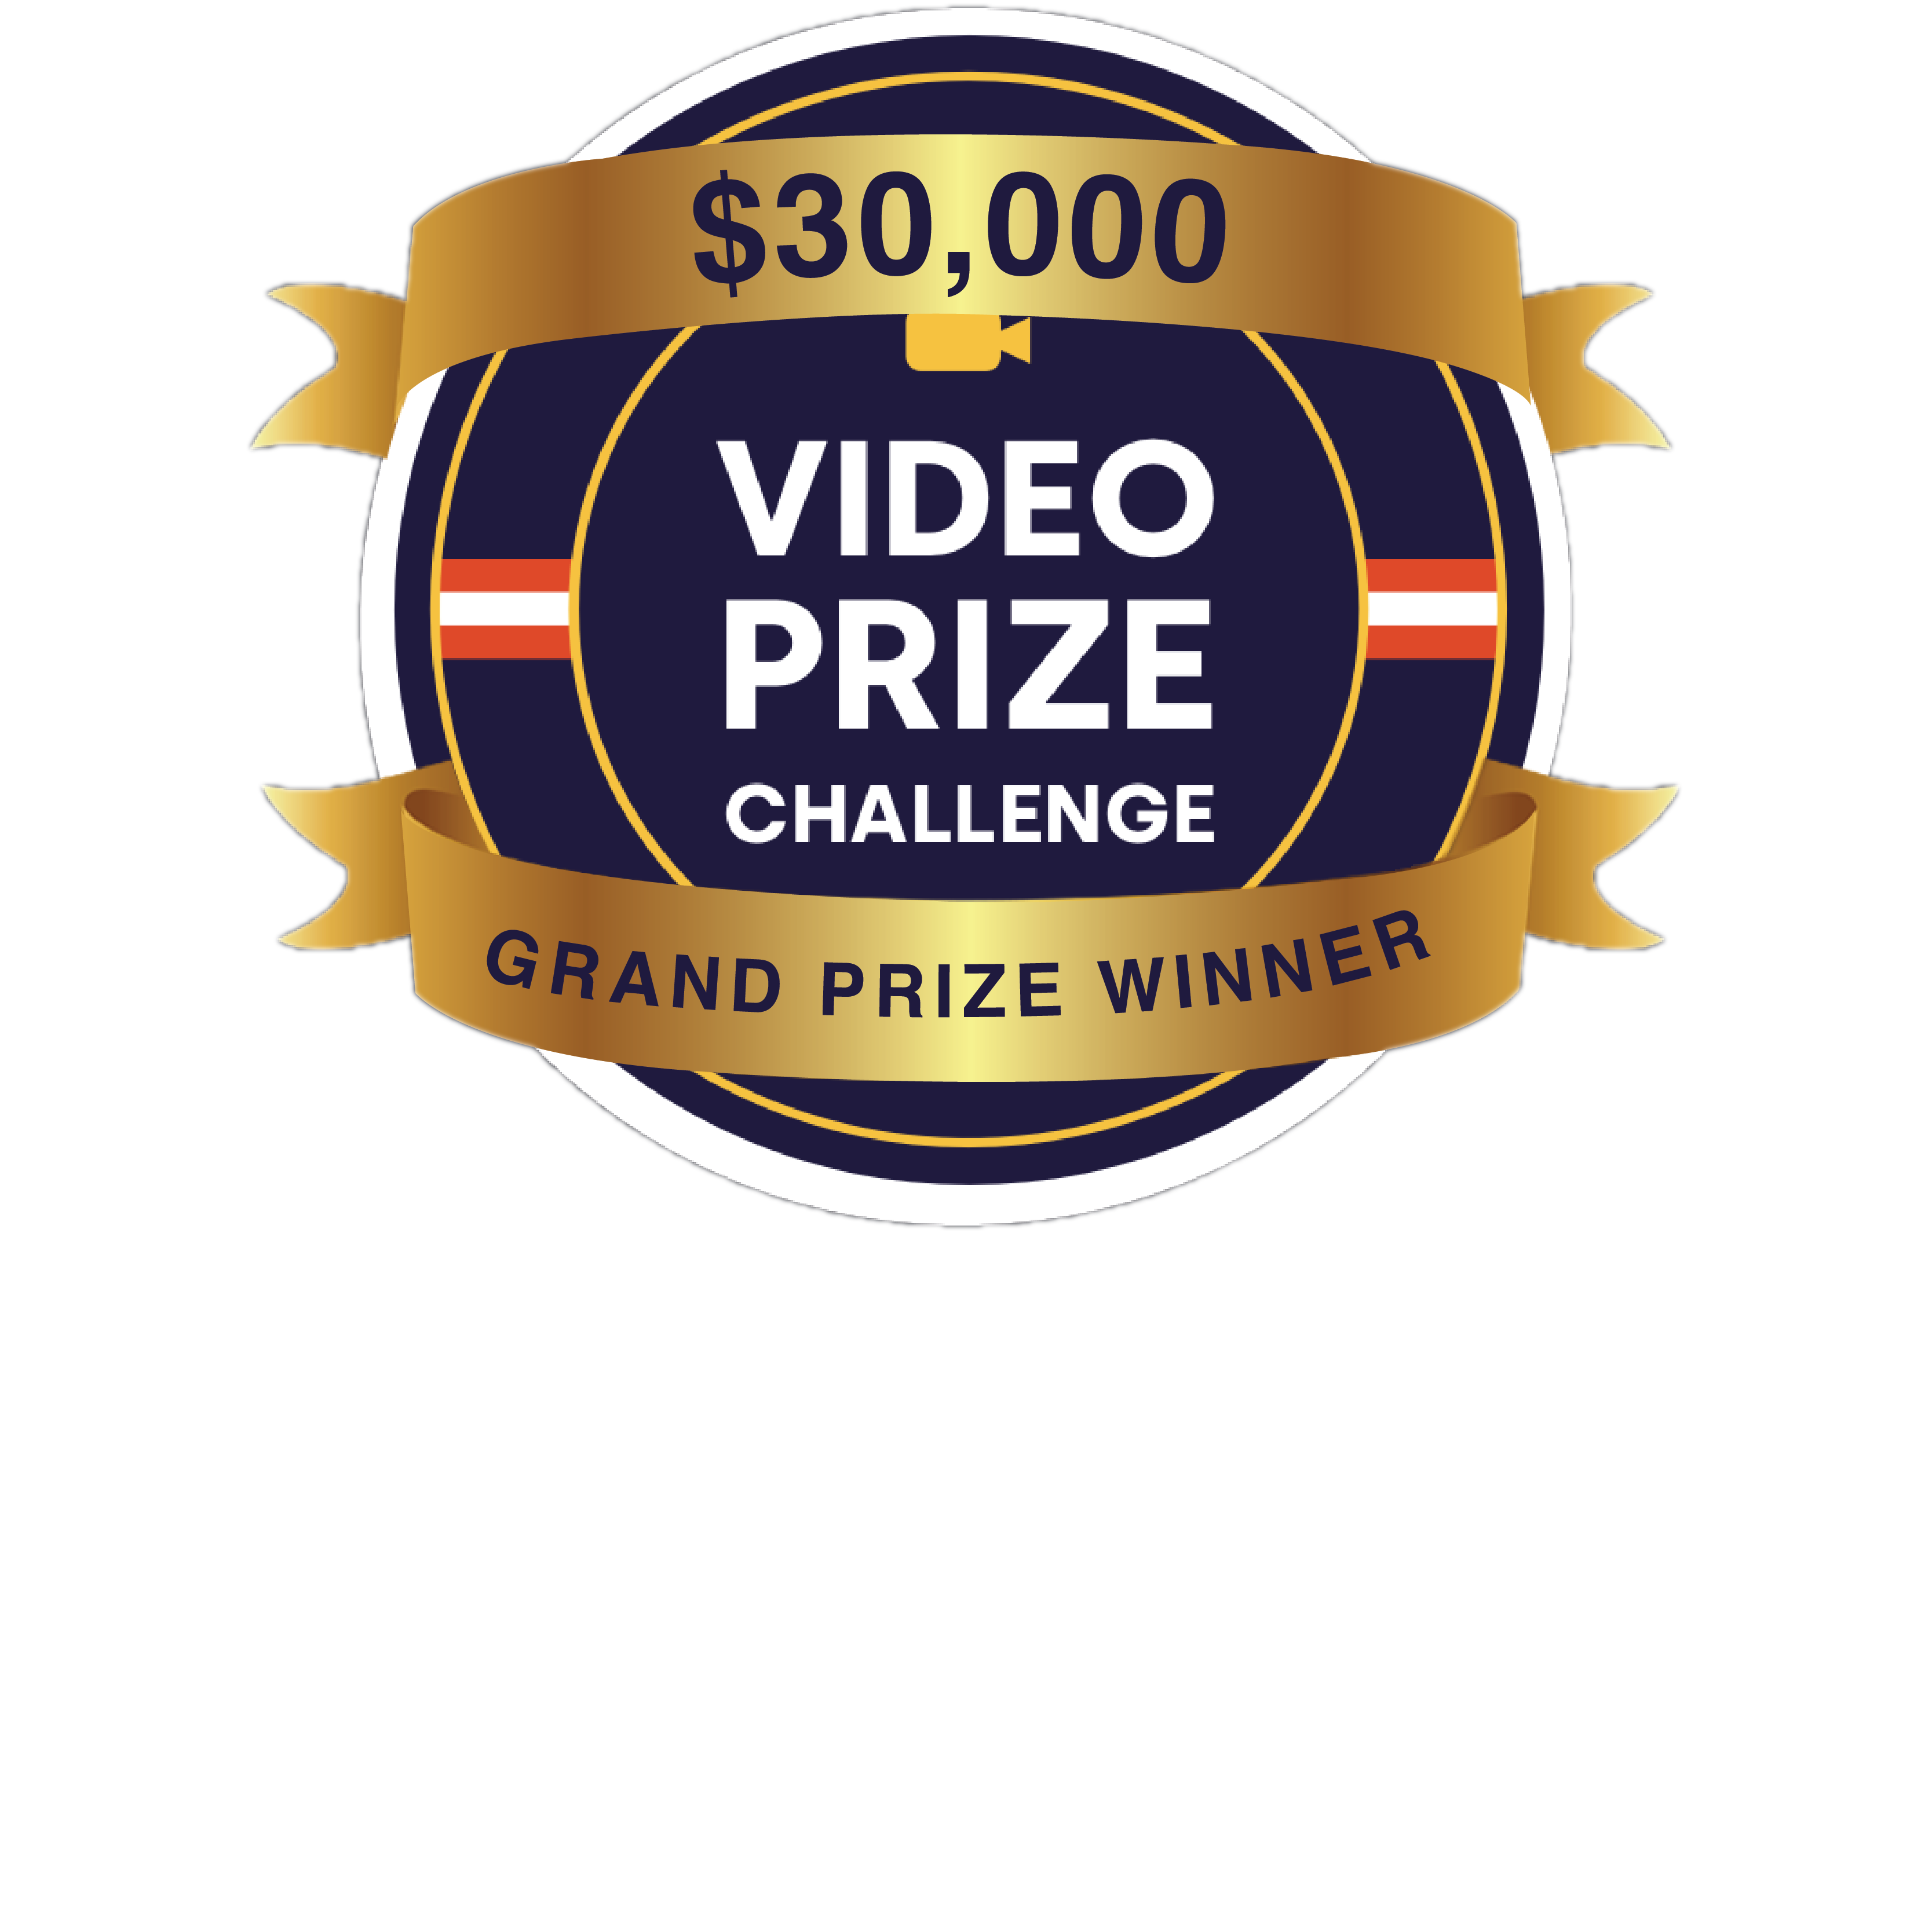 Video Prize Challenge logo overlaid with $30,000 Grand Prize Winner